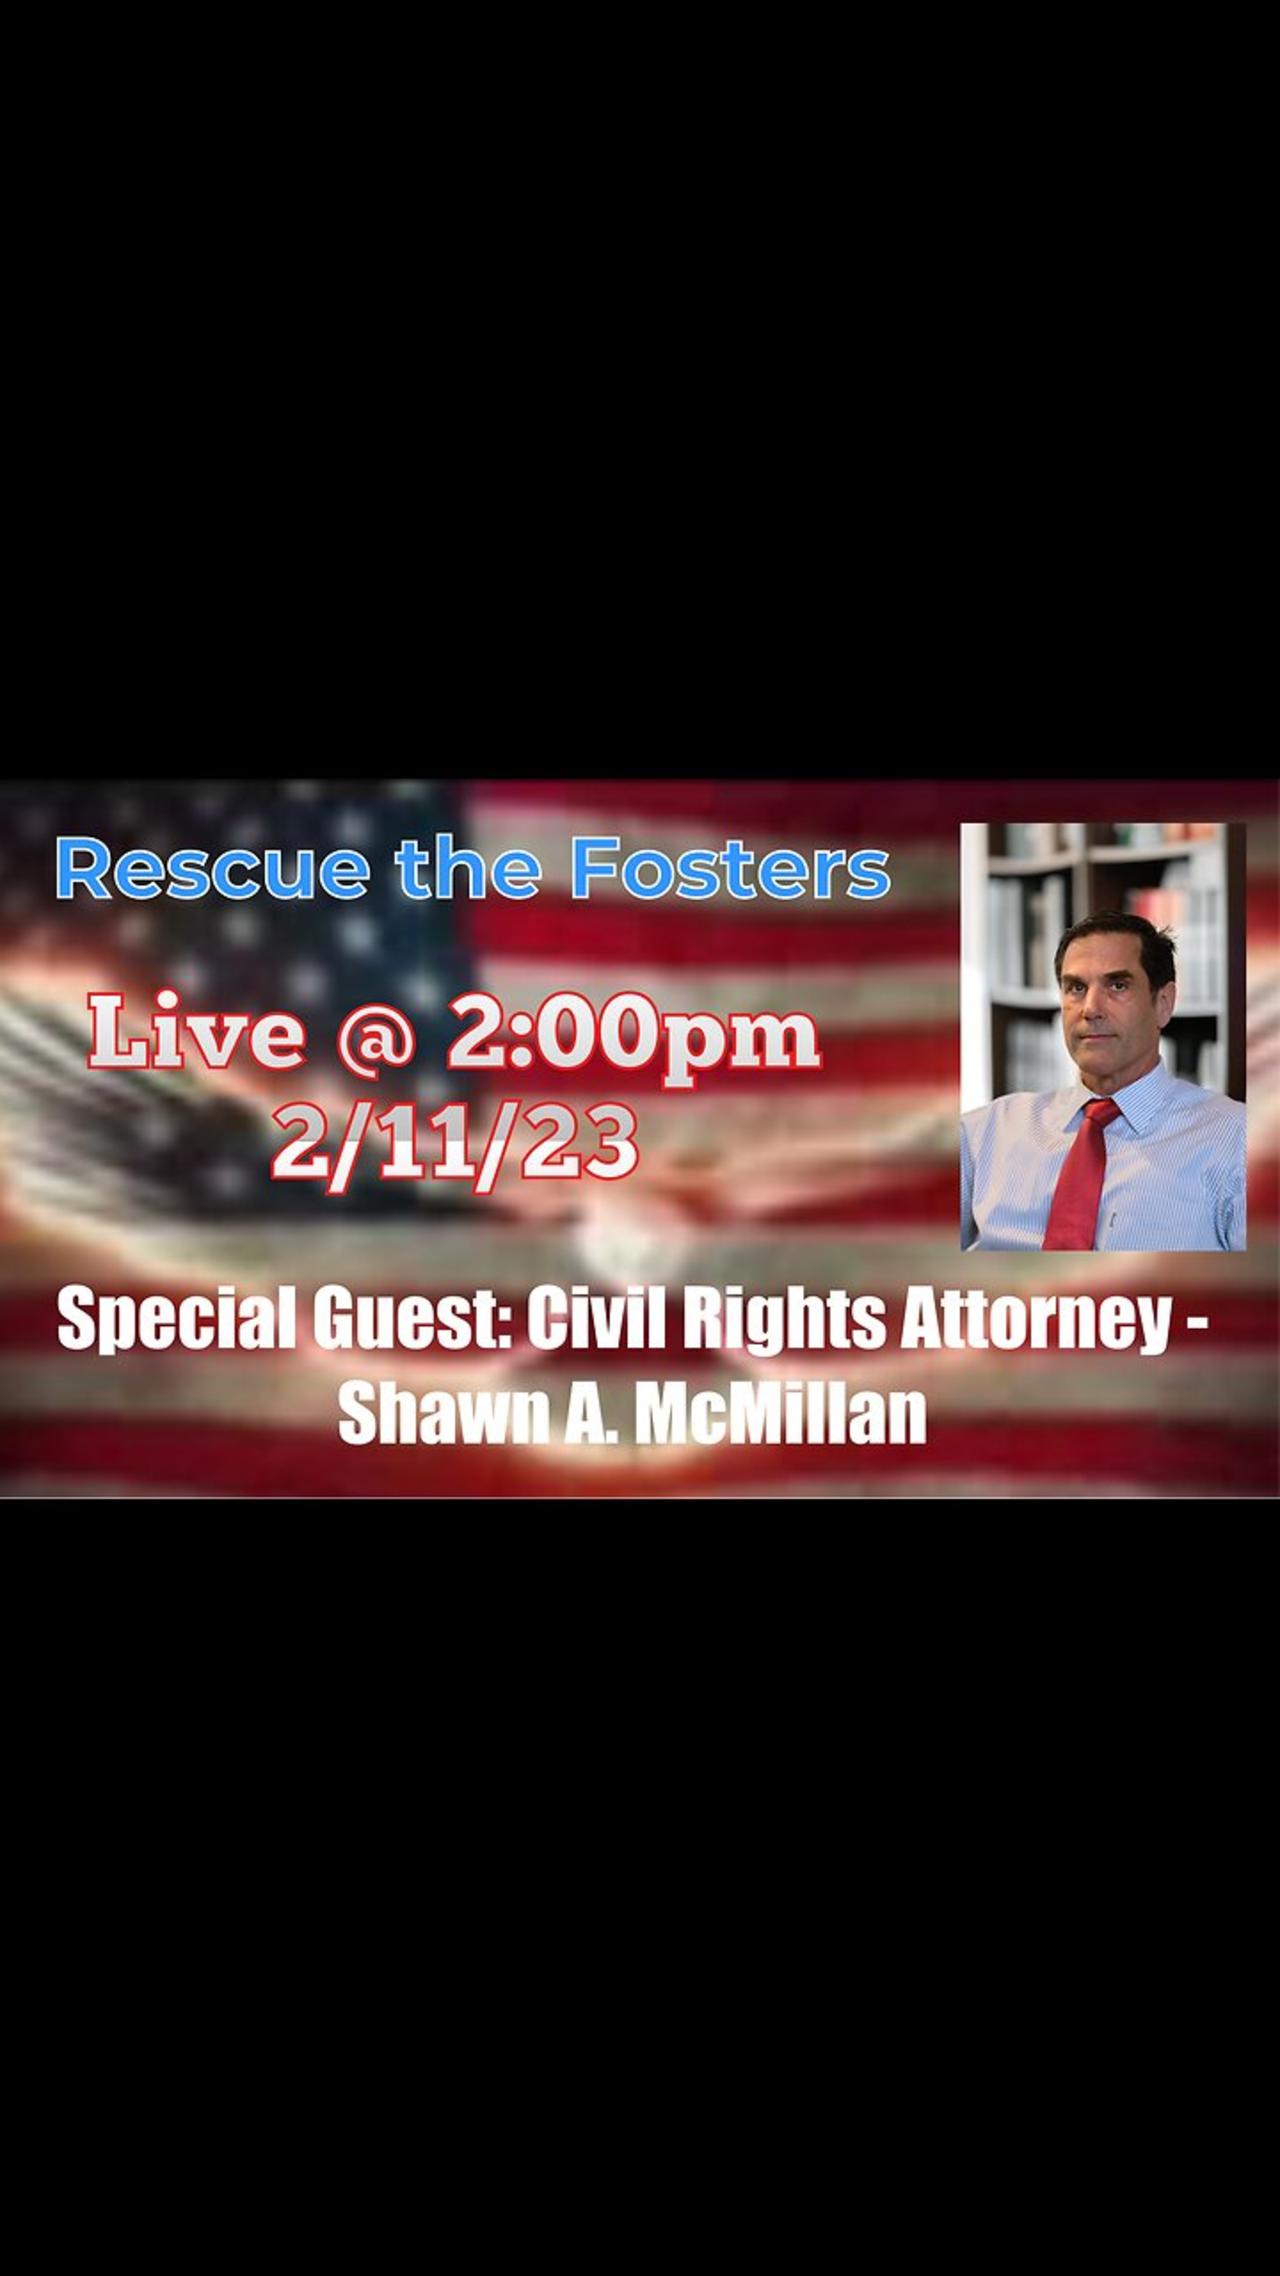 Rescue the Fosters w/ Special Guest: Civil Rights Attorney - Shawn A. McMillan